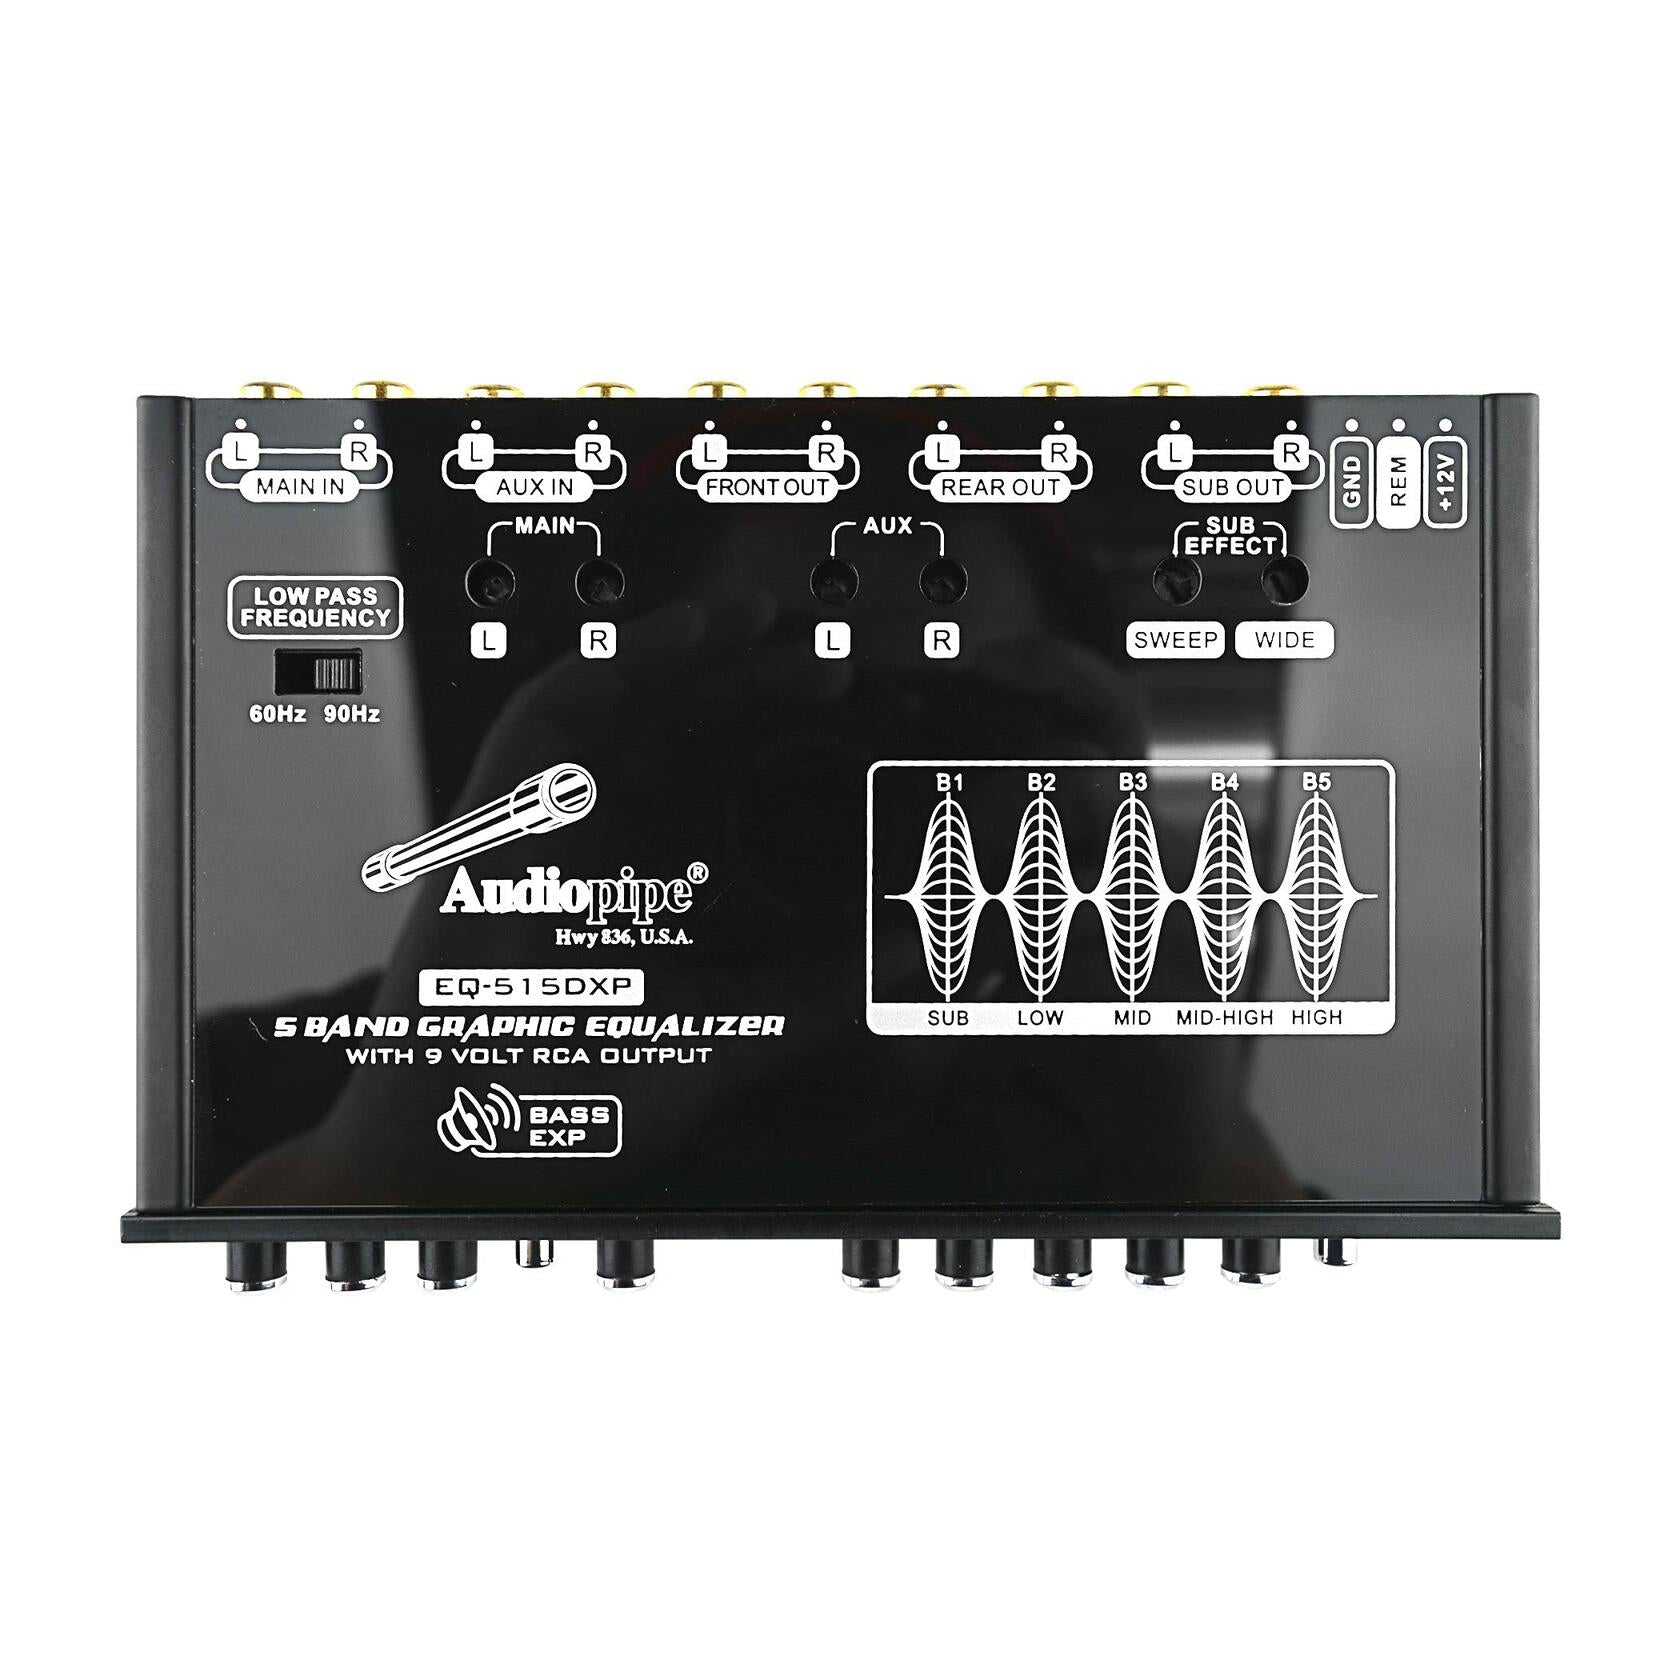 Audiopipe EQ515DXP 5 Band Graphic Equalizer with 9 Volt Line Driver Output